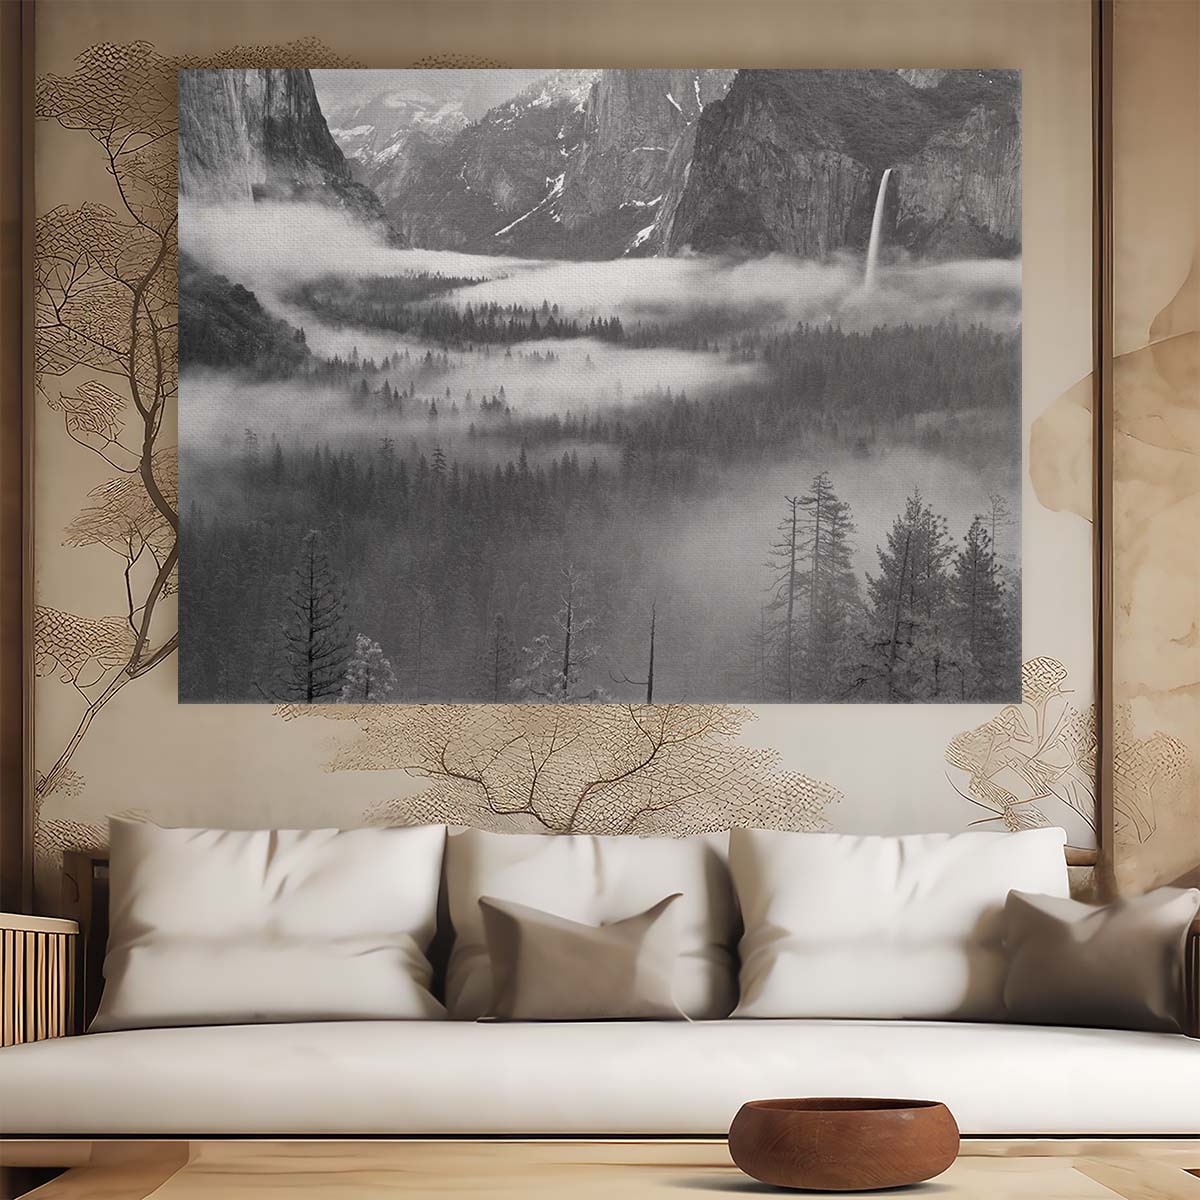 Yosemite Valley Foggy Forest Waterfall Monochrome Wall Art by Luxuriance Designs. Made in USA.